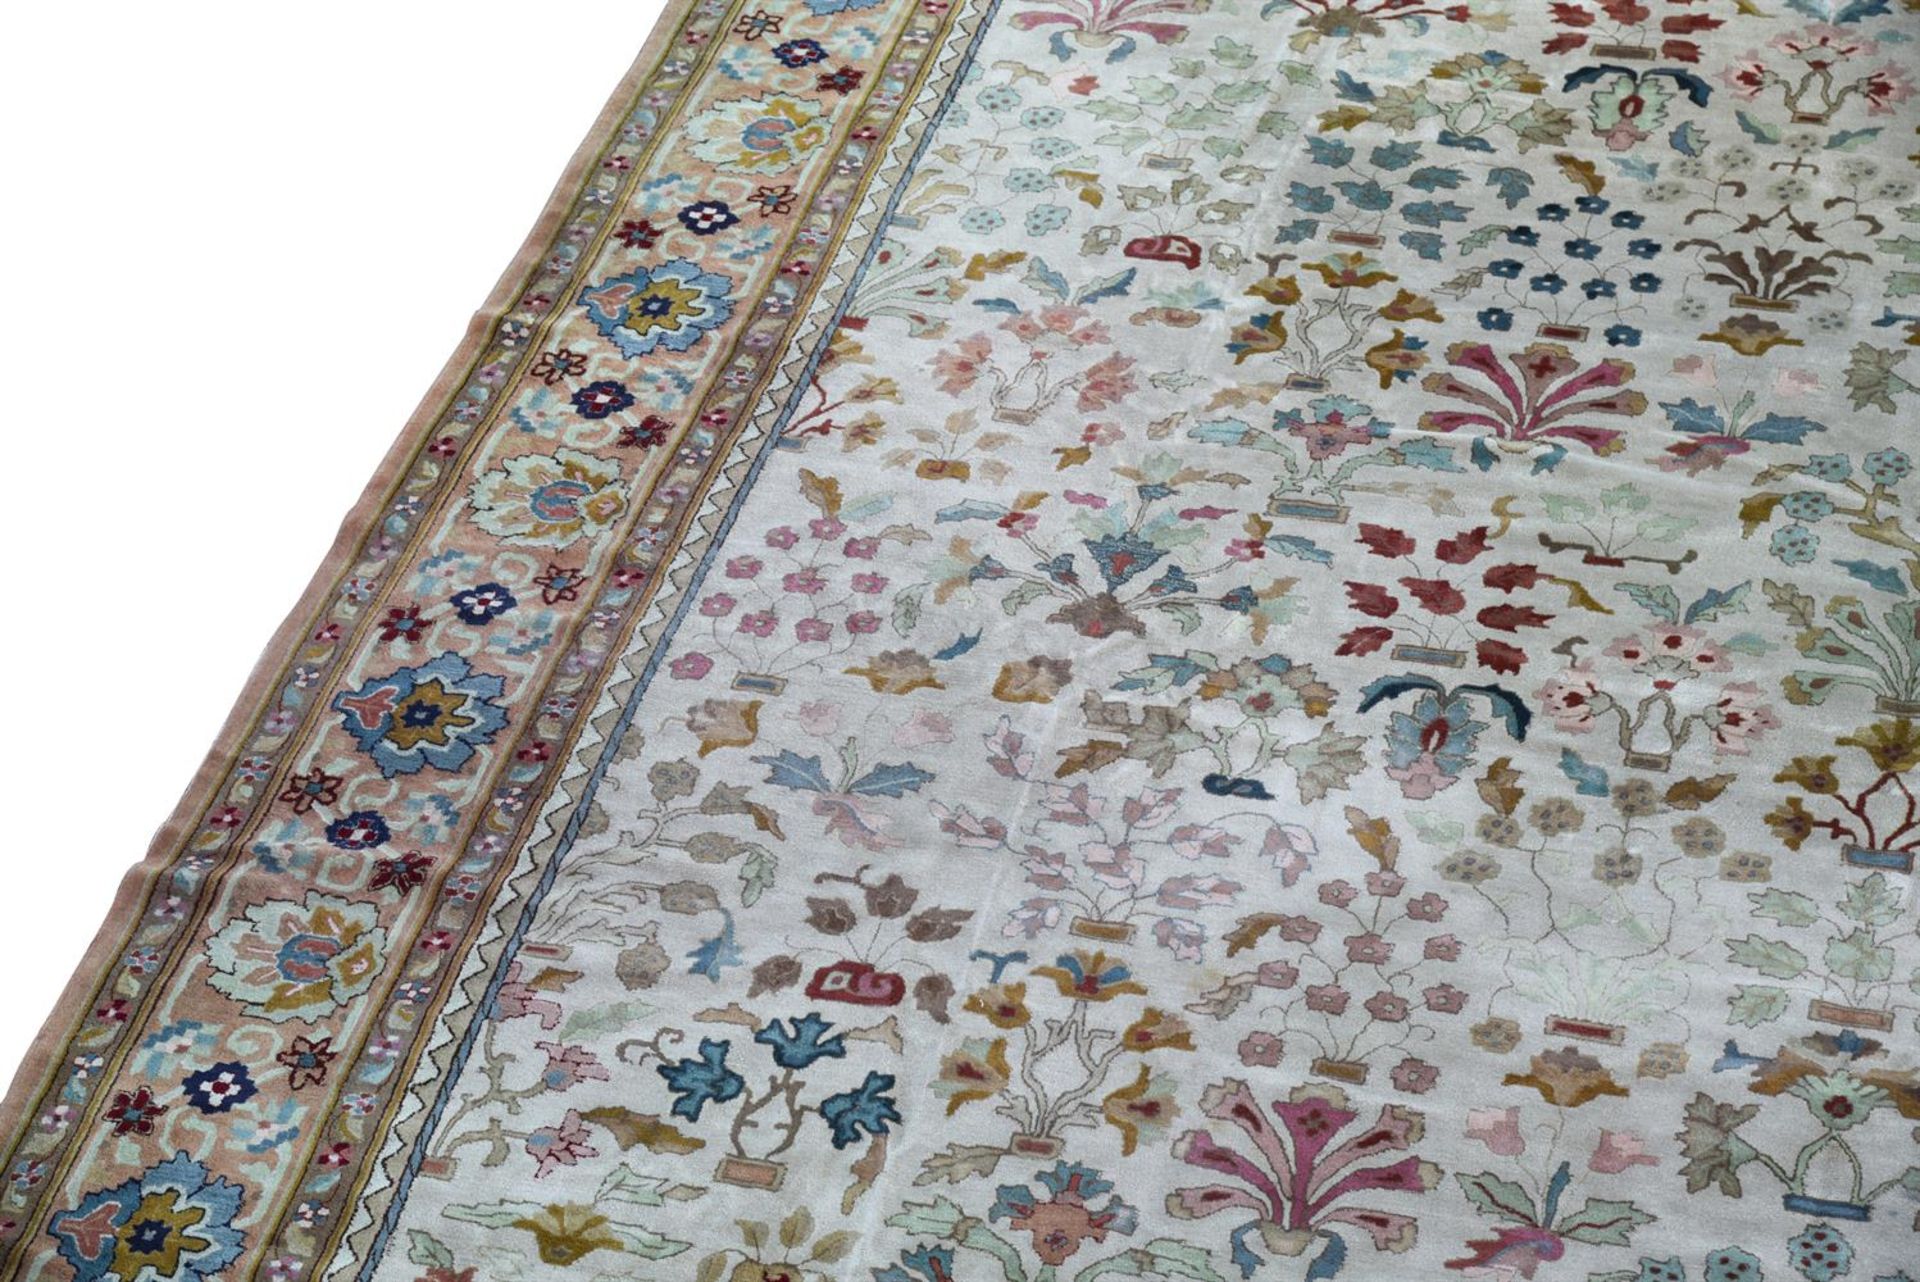 A TETEX CARPET, approximately 512 x 400cm - Image 2 of 3